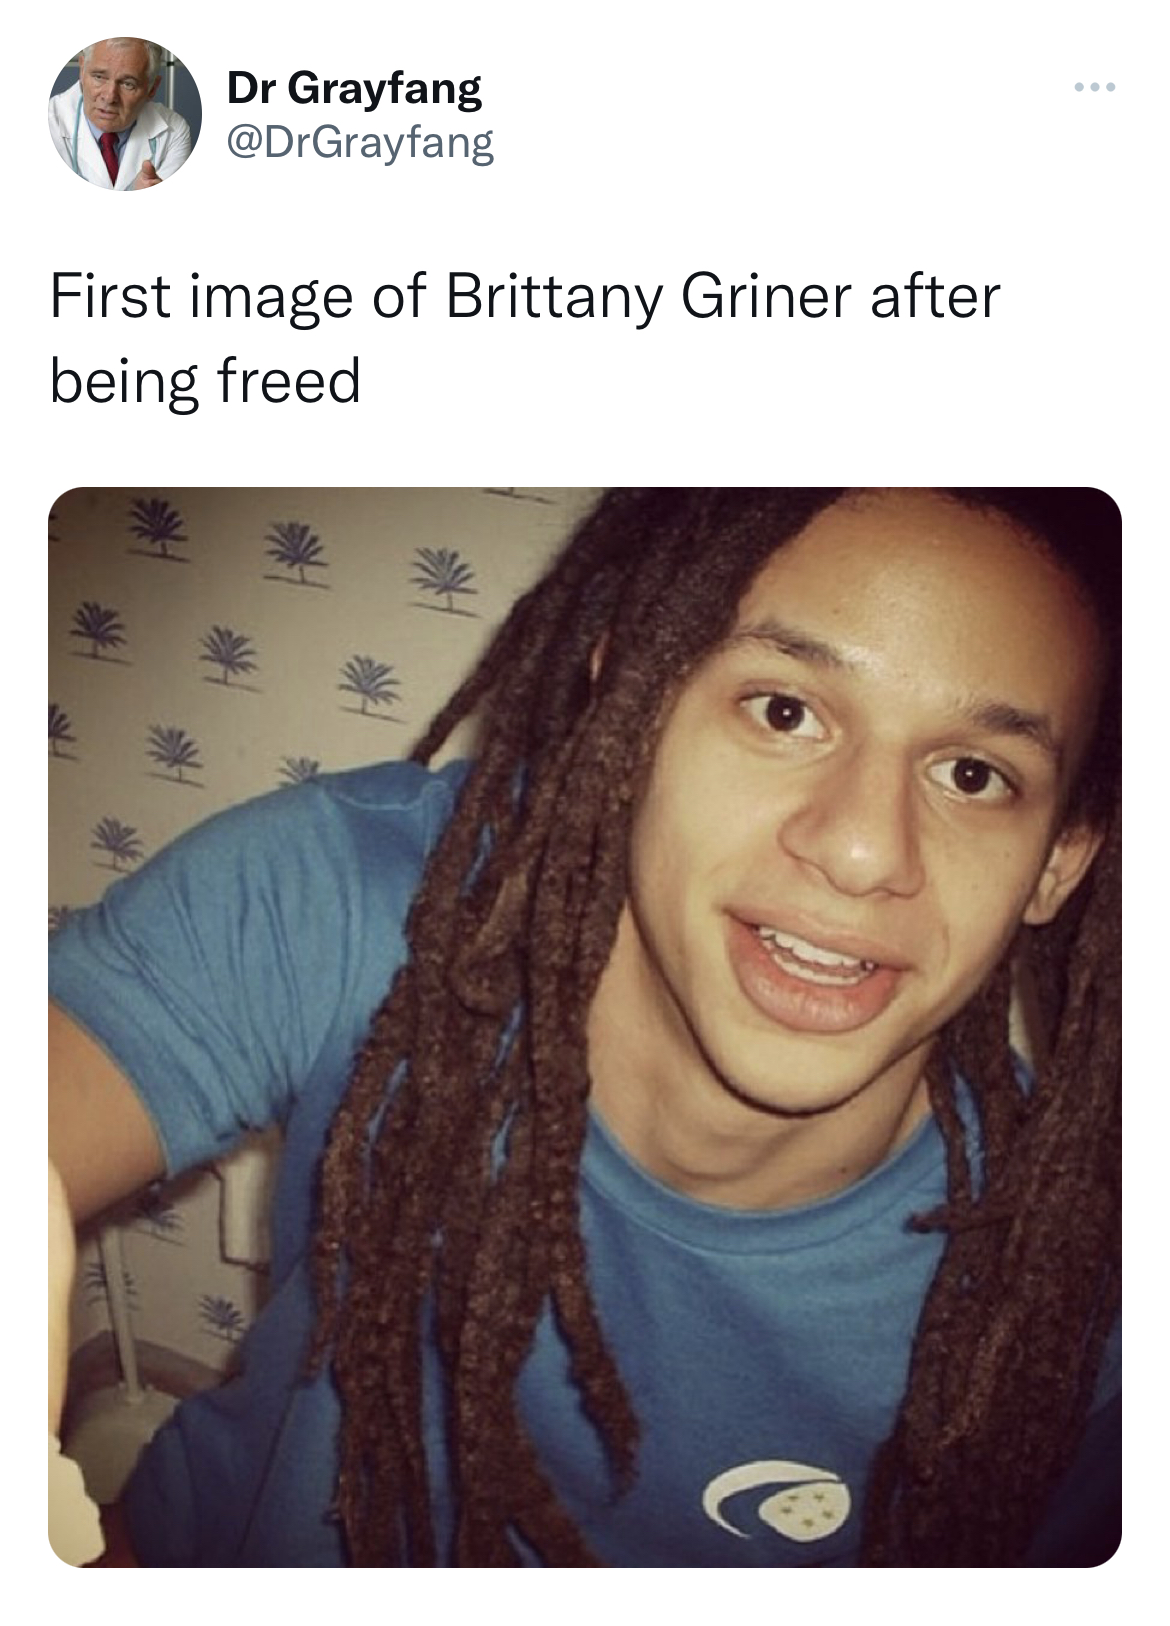 Tweets dunking on celebs - dreadlocks - Dr Grayfang First image of Brittany Griner after being freed www